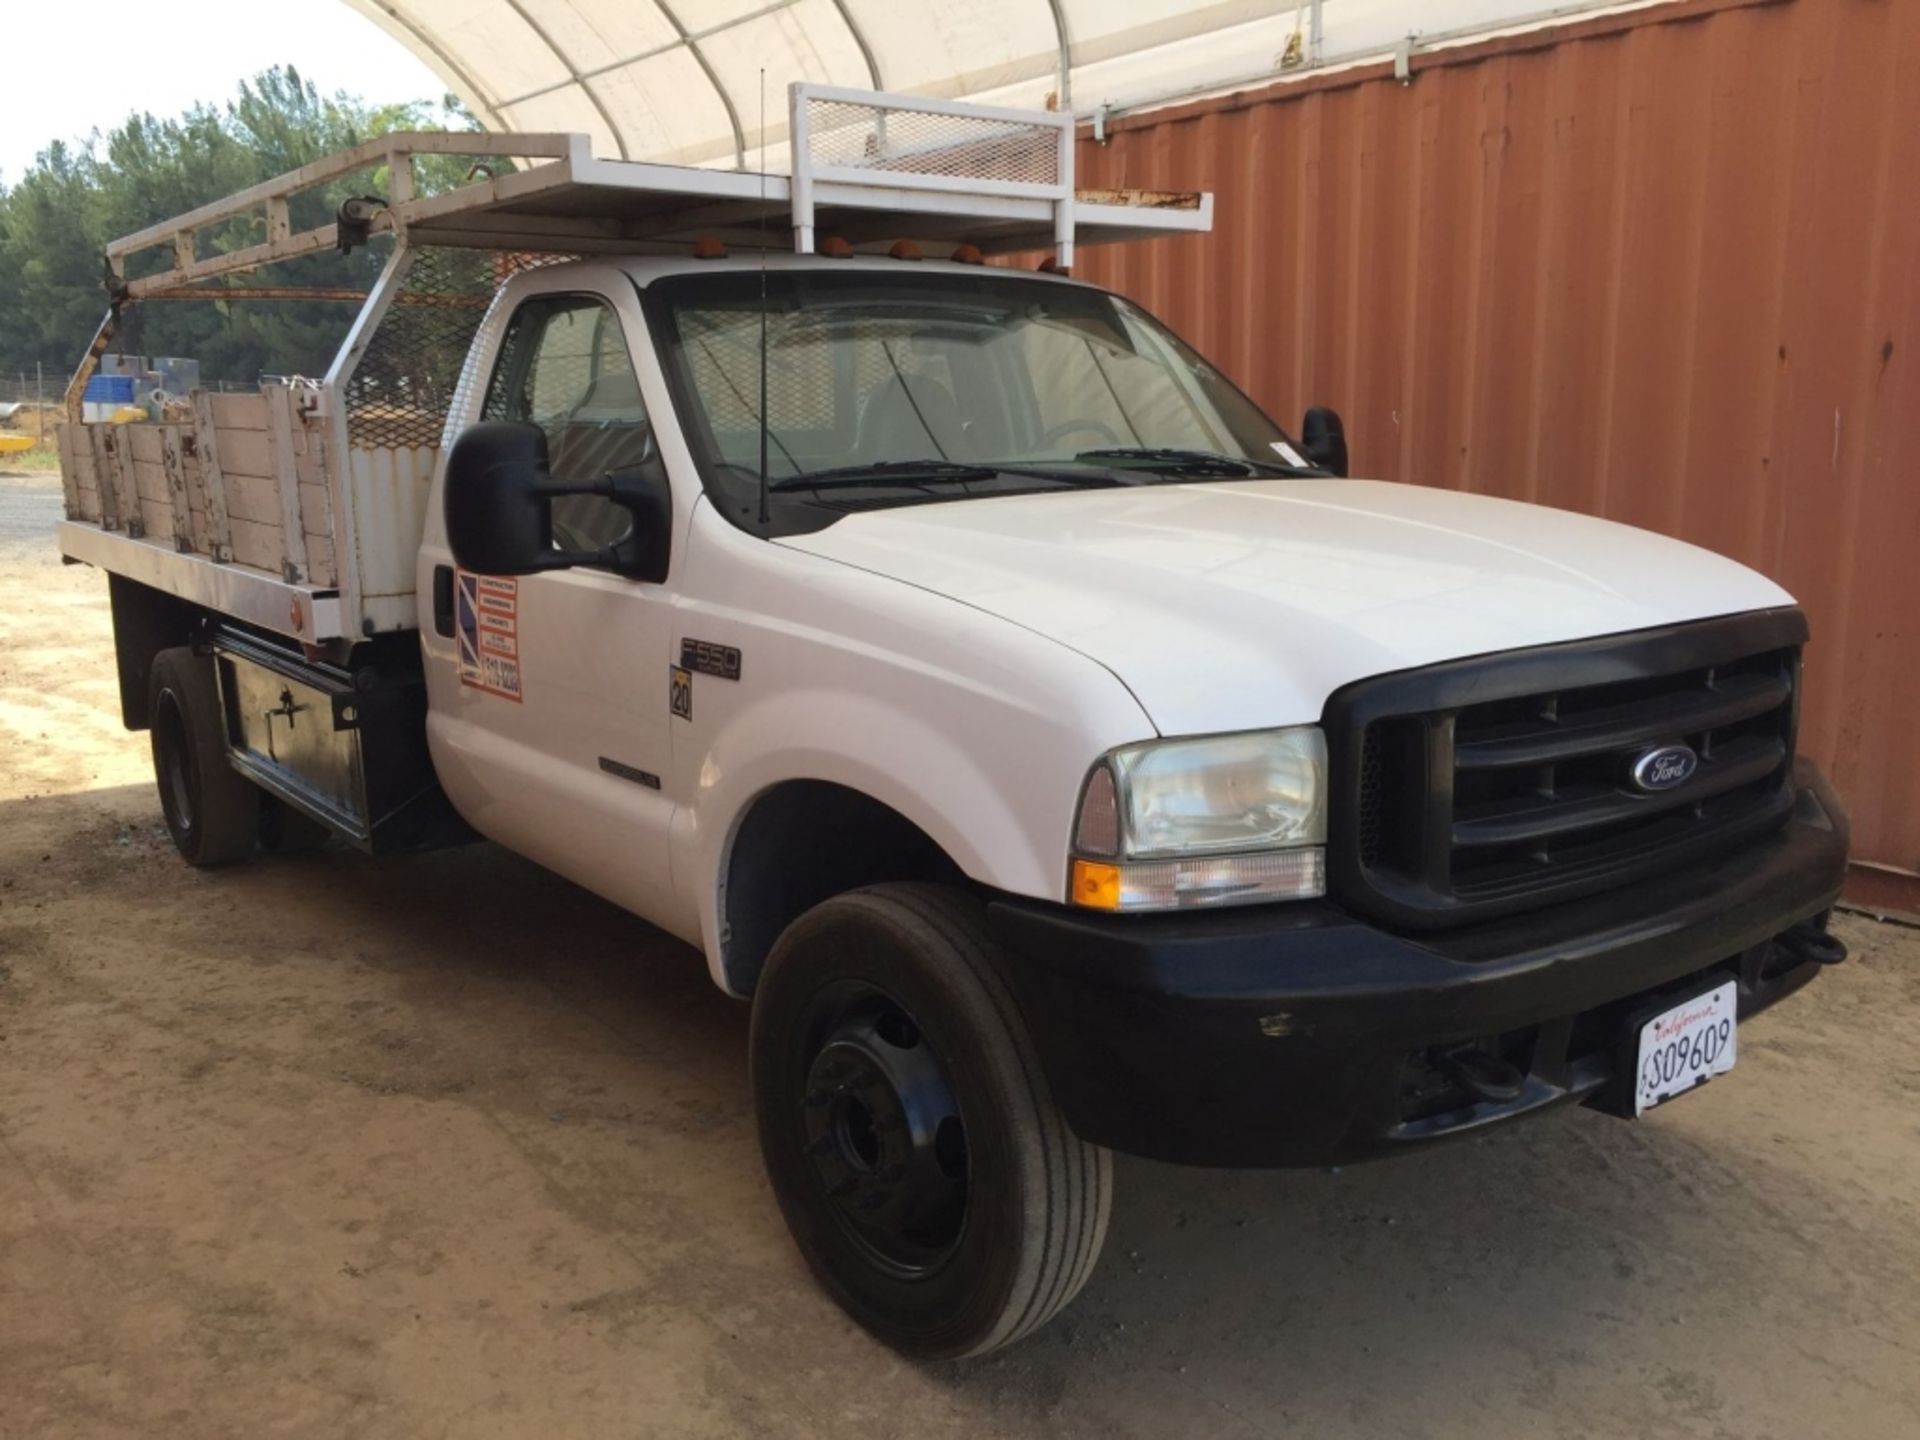 Ford F550 Flatbed Dump Truck, - Image 2 of 72